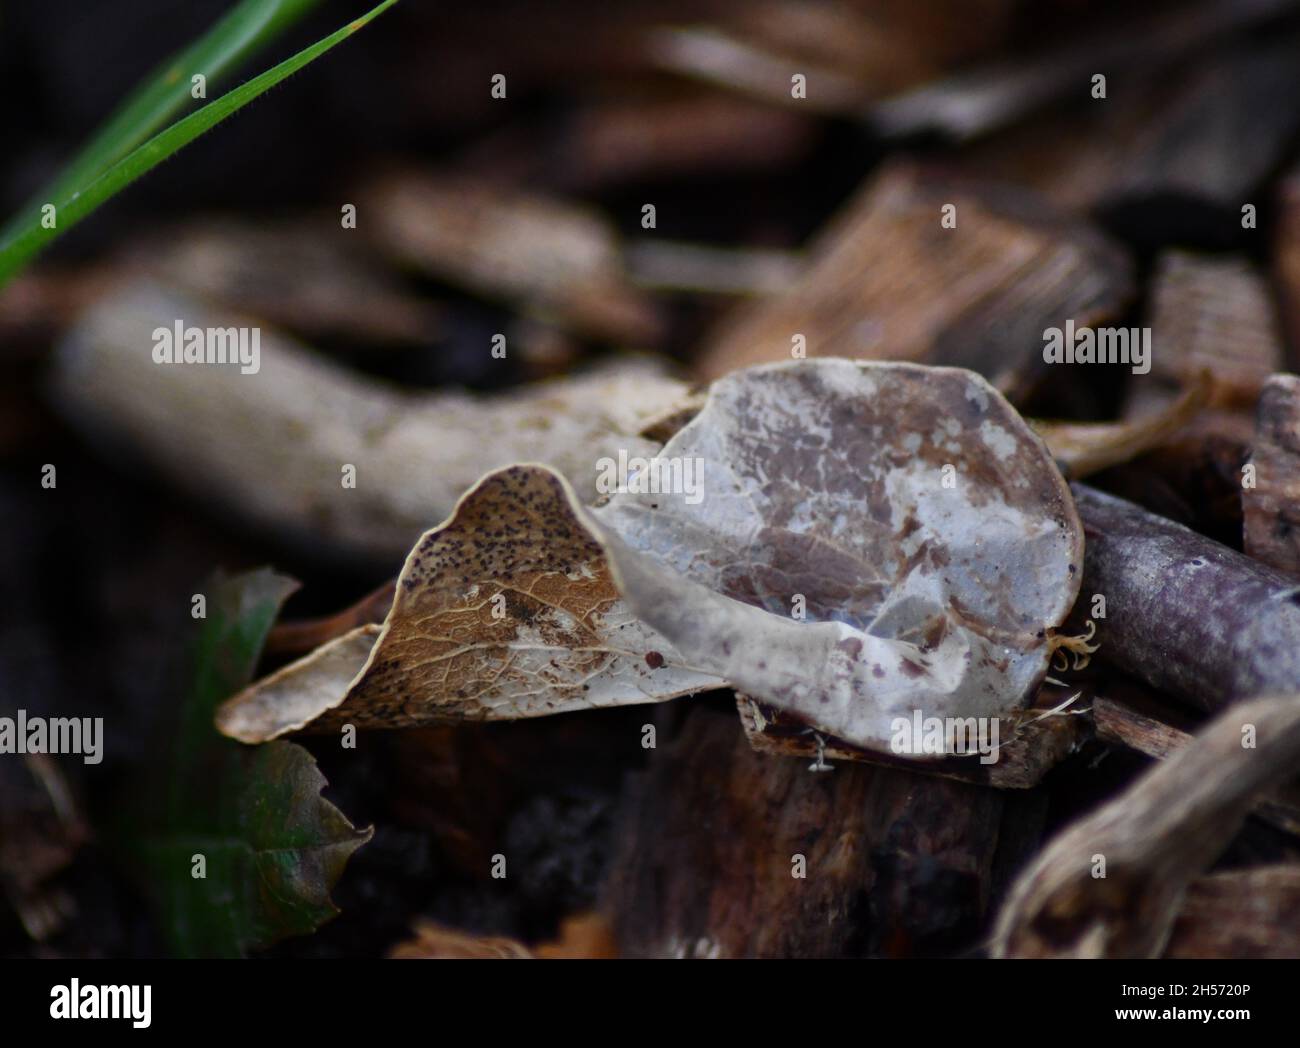 A dead leaf in autumnal browns showing its veins on the bed of a forest floor Stock Photo